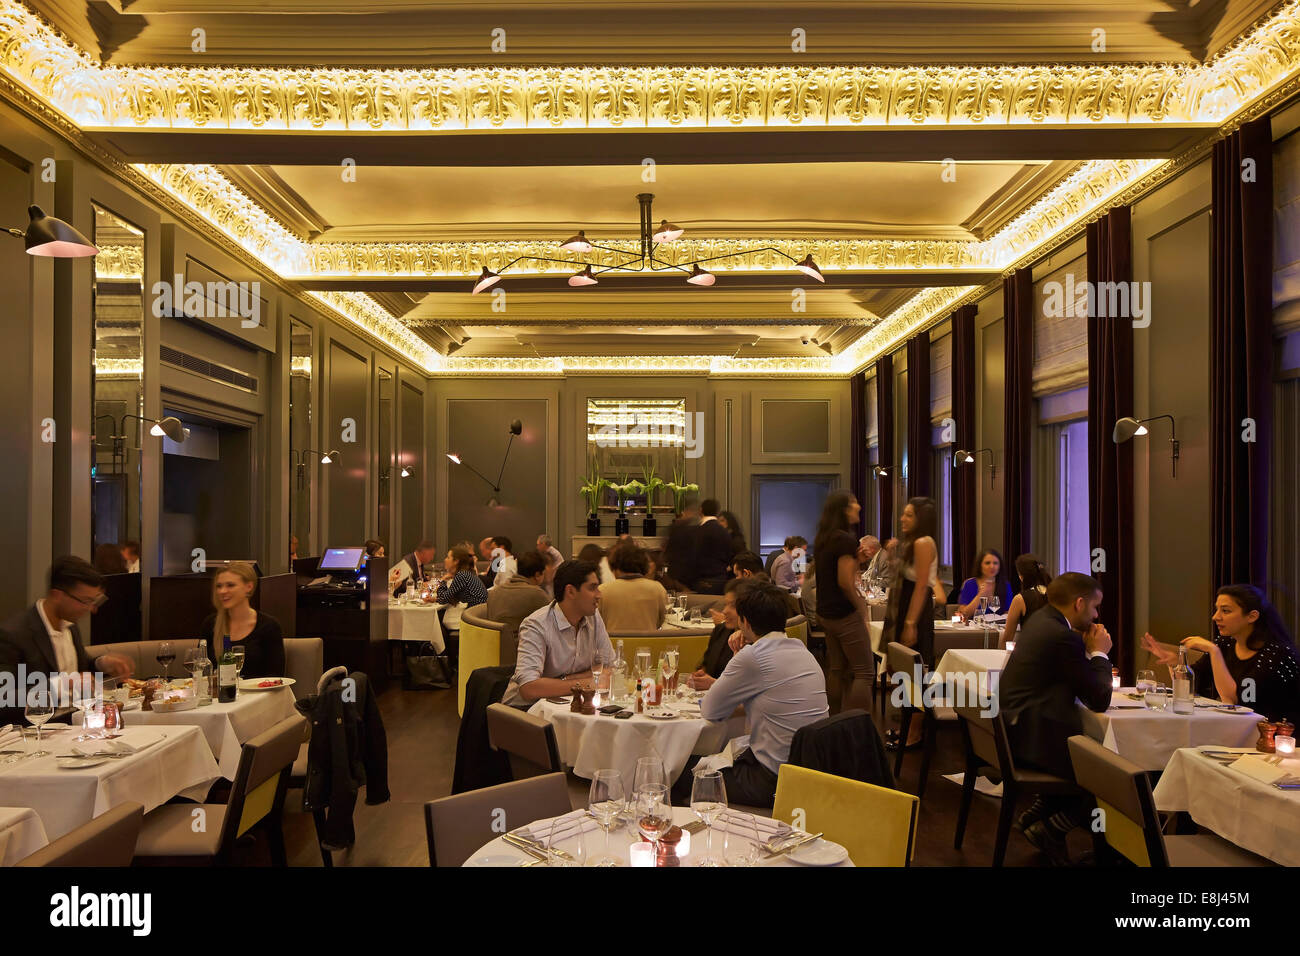 Christopher's, London, United Kingdom. Architect: De Matos Ryan, 2013. Dining room with guests. Stock Photo